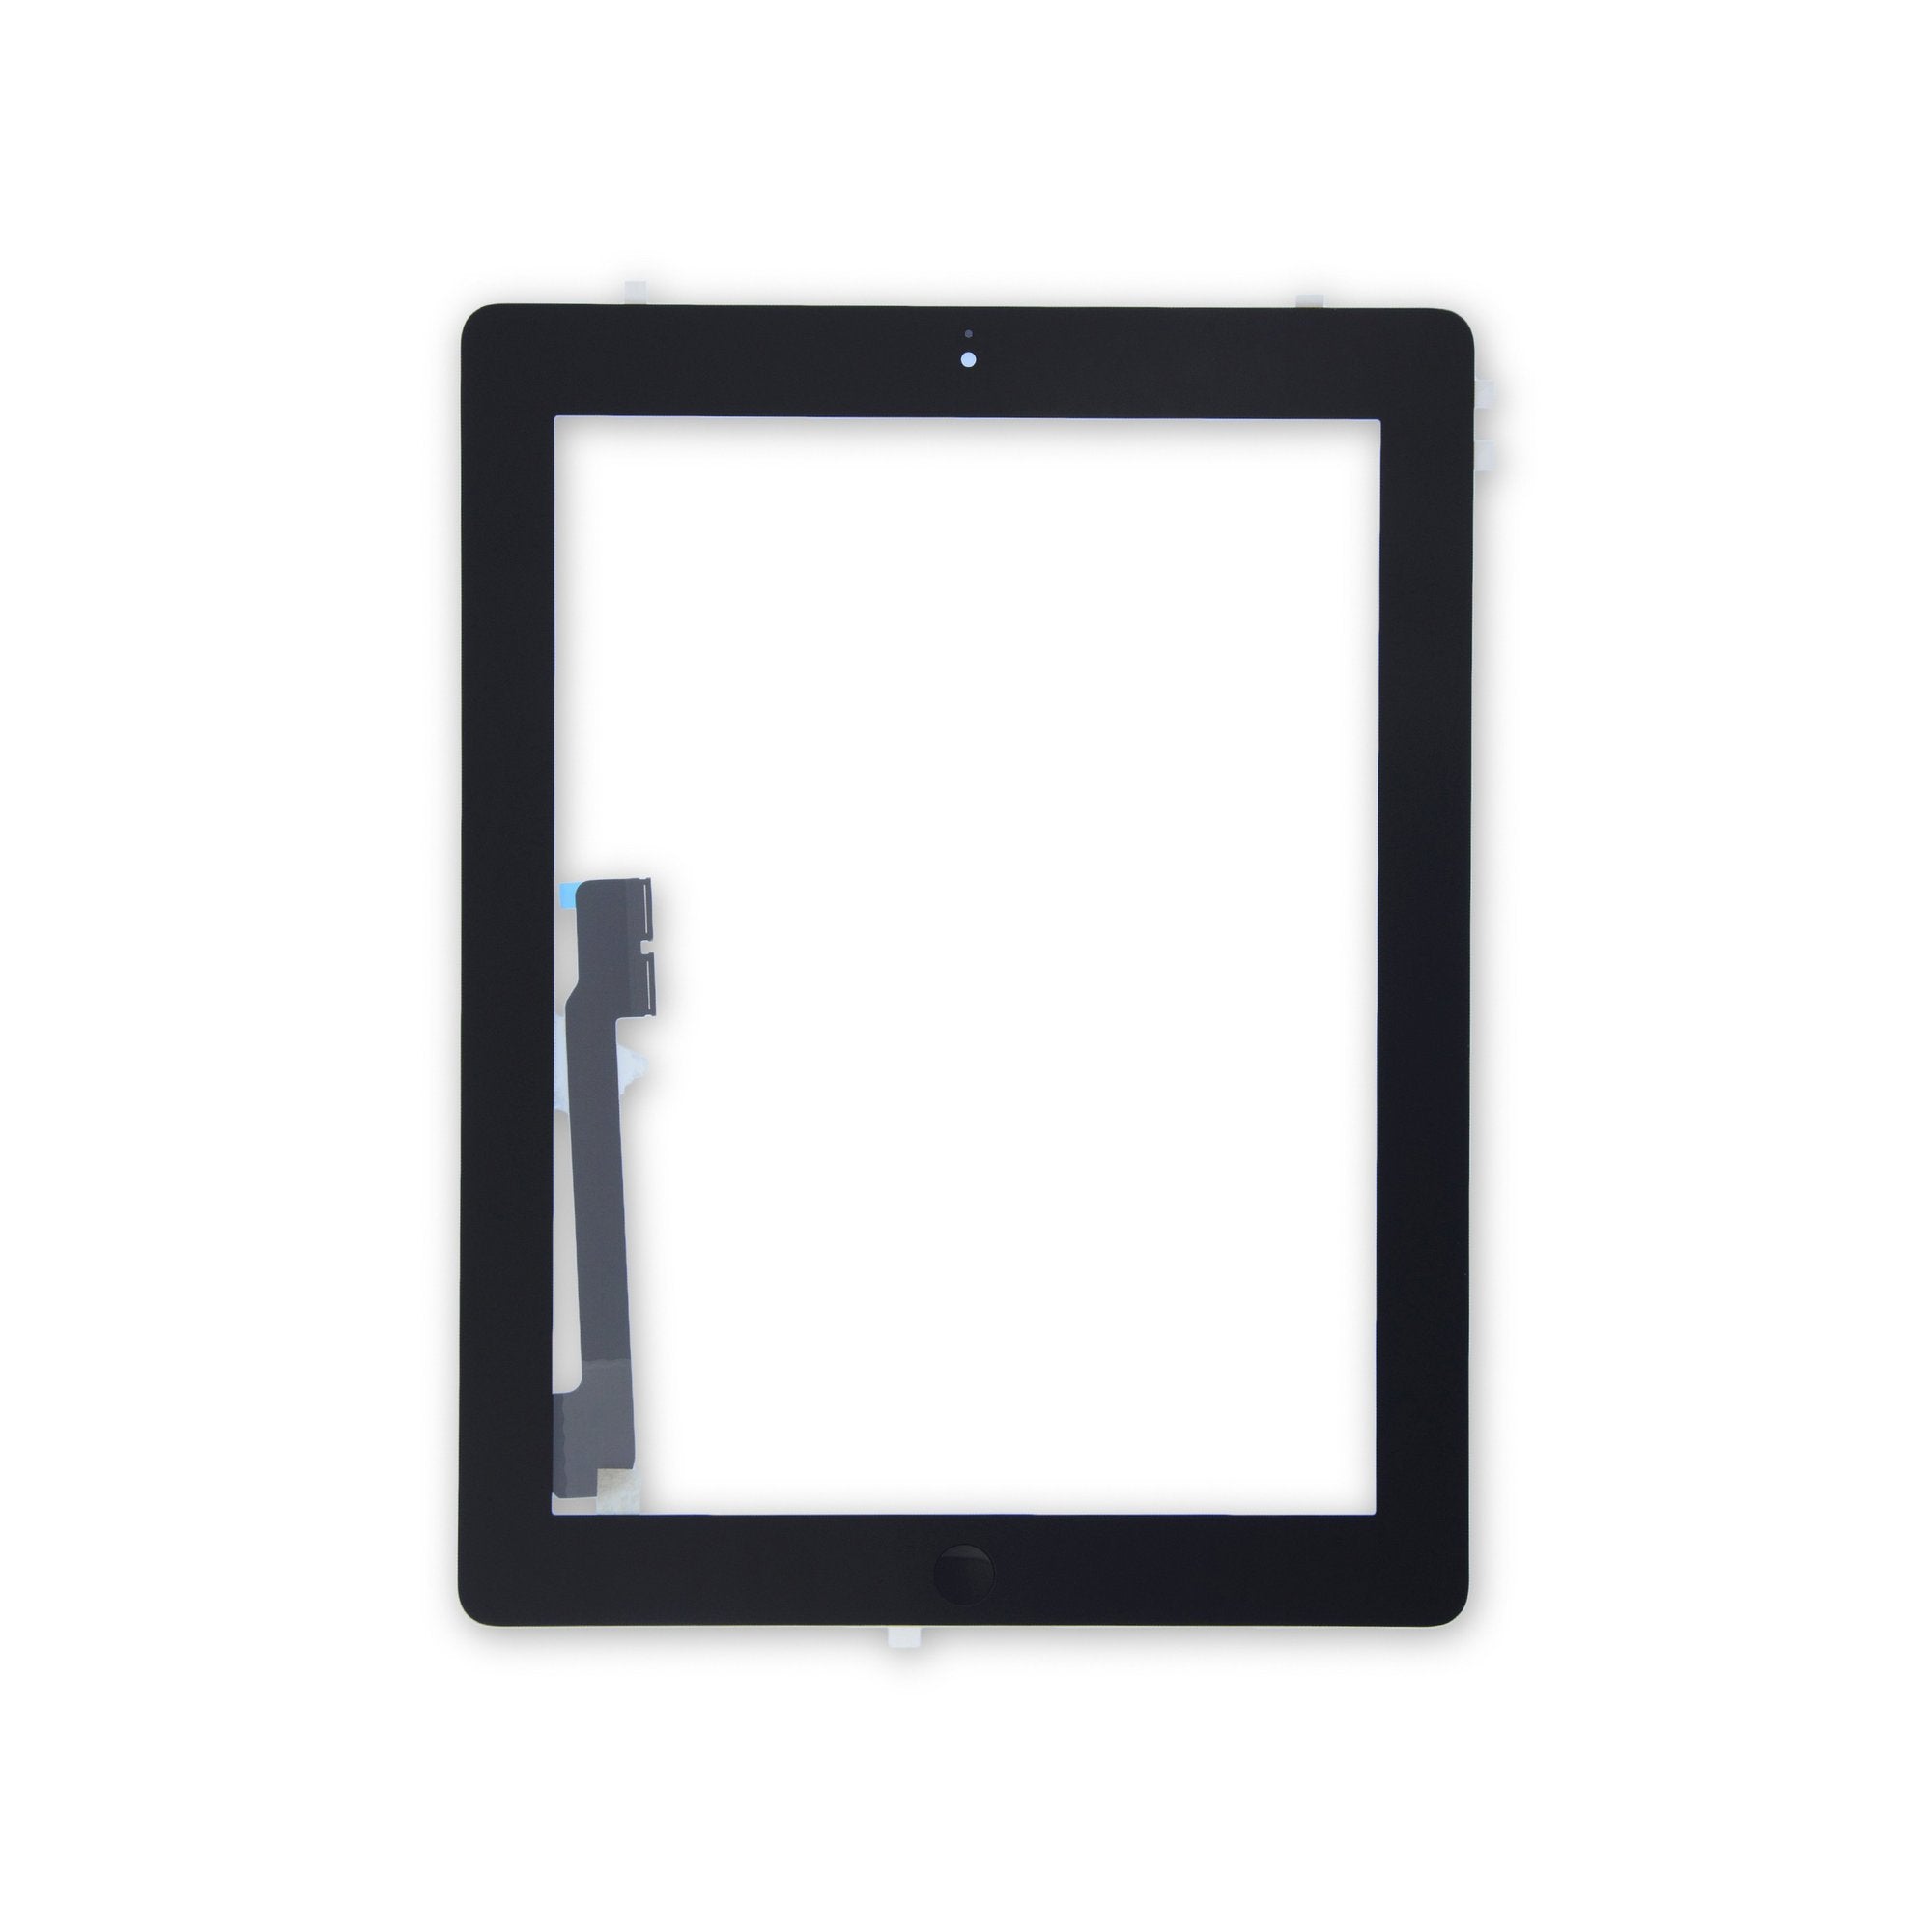 iPad 4 Screen Digitizer Assembly Black New Part Only